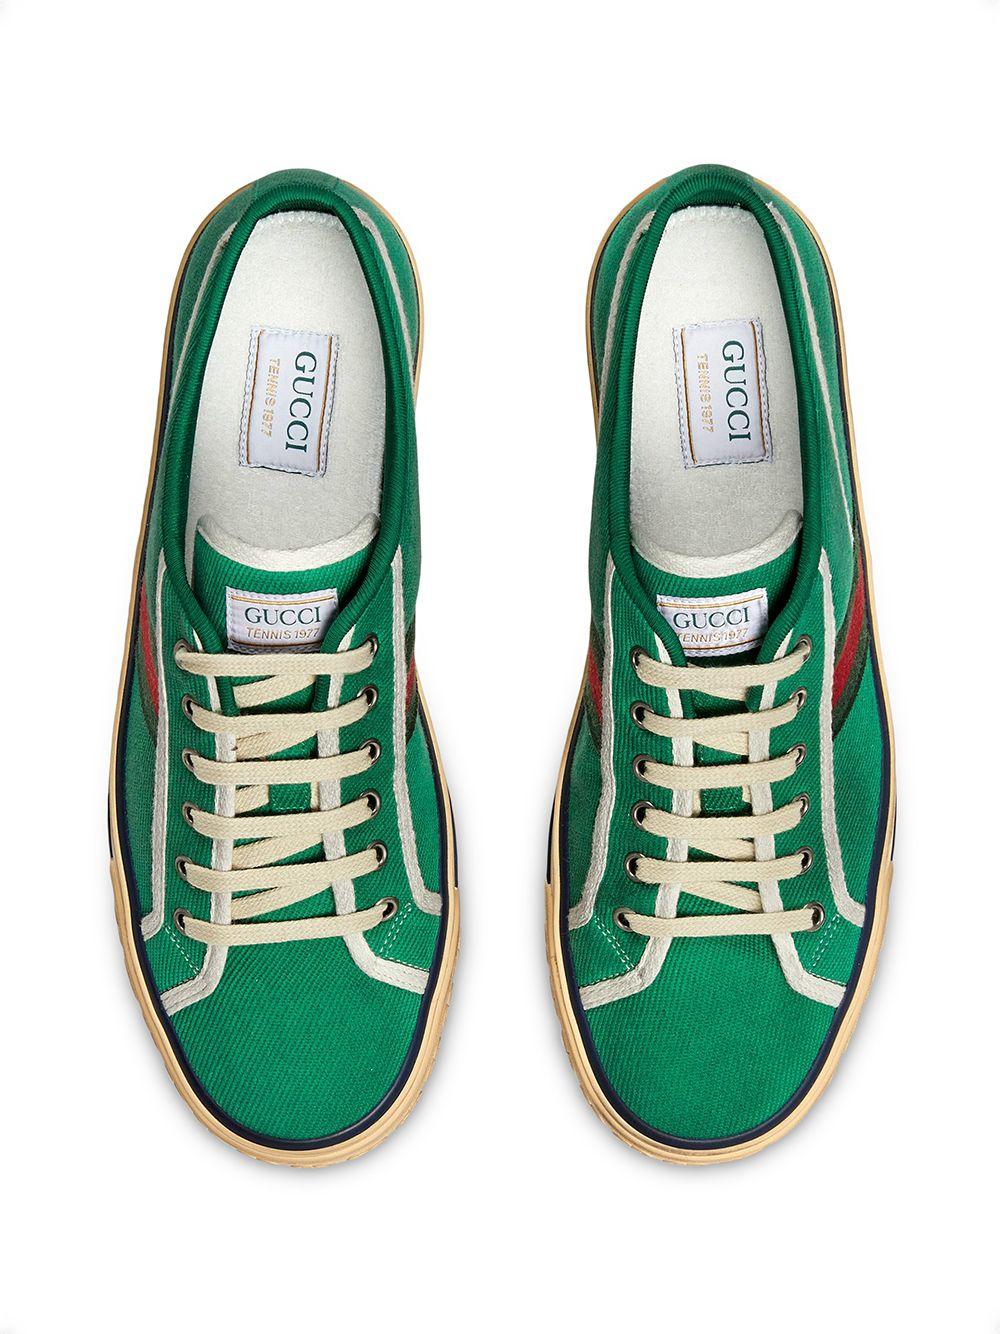 Gucci Cotton Tennis 1977 Sneakers in Green for Men - Lyst